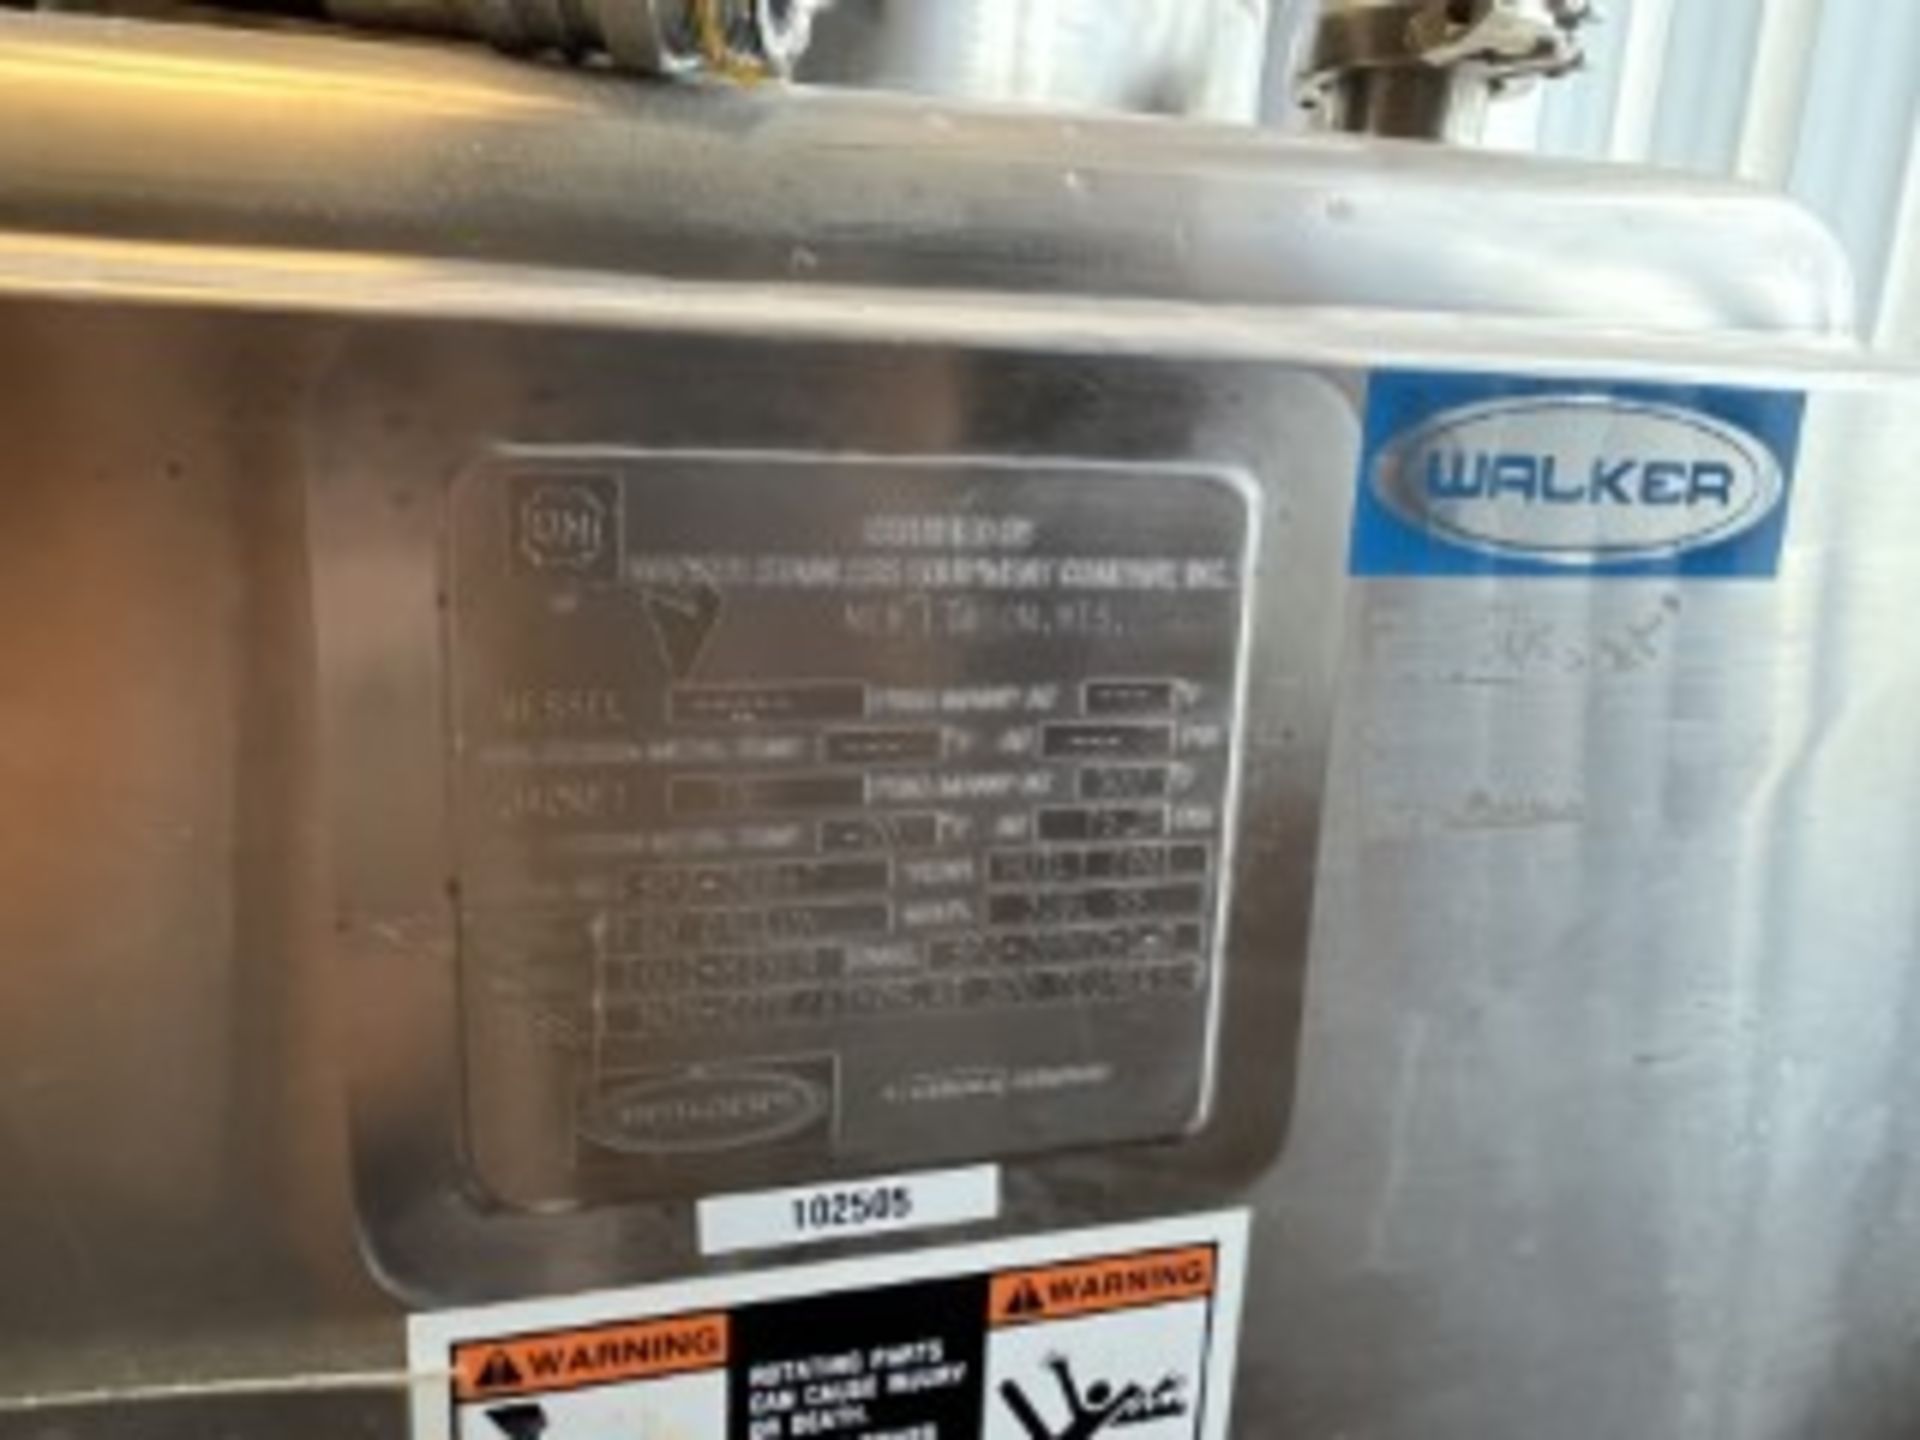 WALKER STAINLESS STEEL 50 GALLON LIQUI-MIXER WITH 10 HP LEESON MOTOR - Image 3 of 3